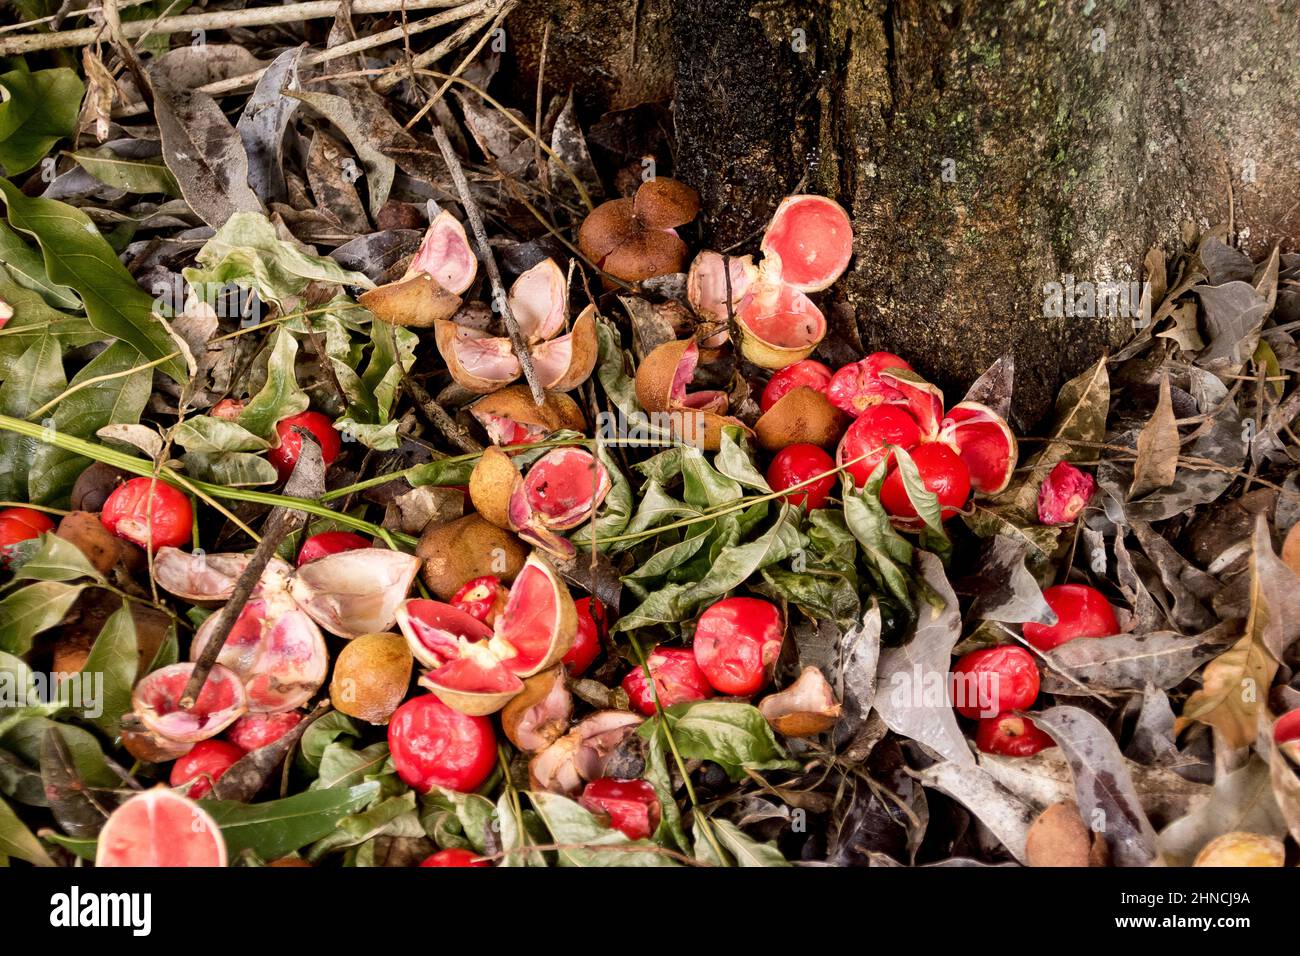 Mass of fallen red seeds and pods from a Small-leaved tamarind, tree, Diploglottis campbellii.  Australian rainforest tree in Queensland. Bush tucker. Stock Photo